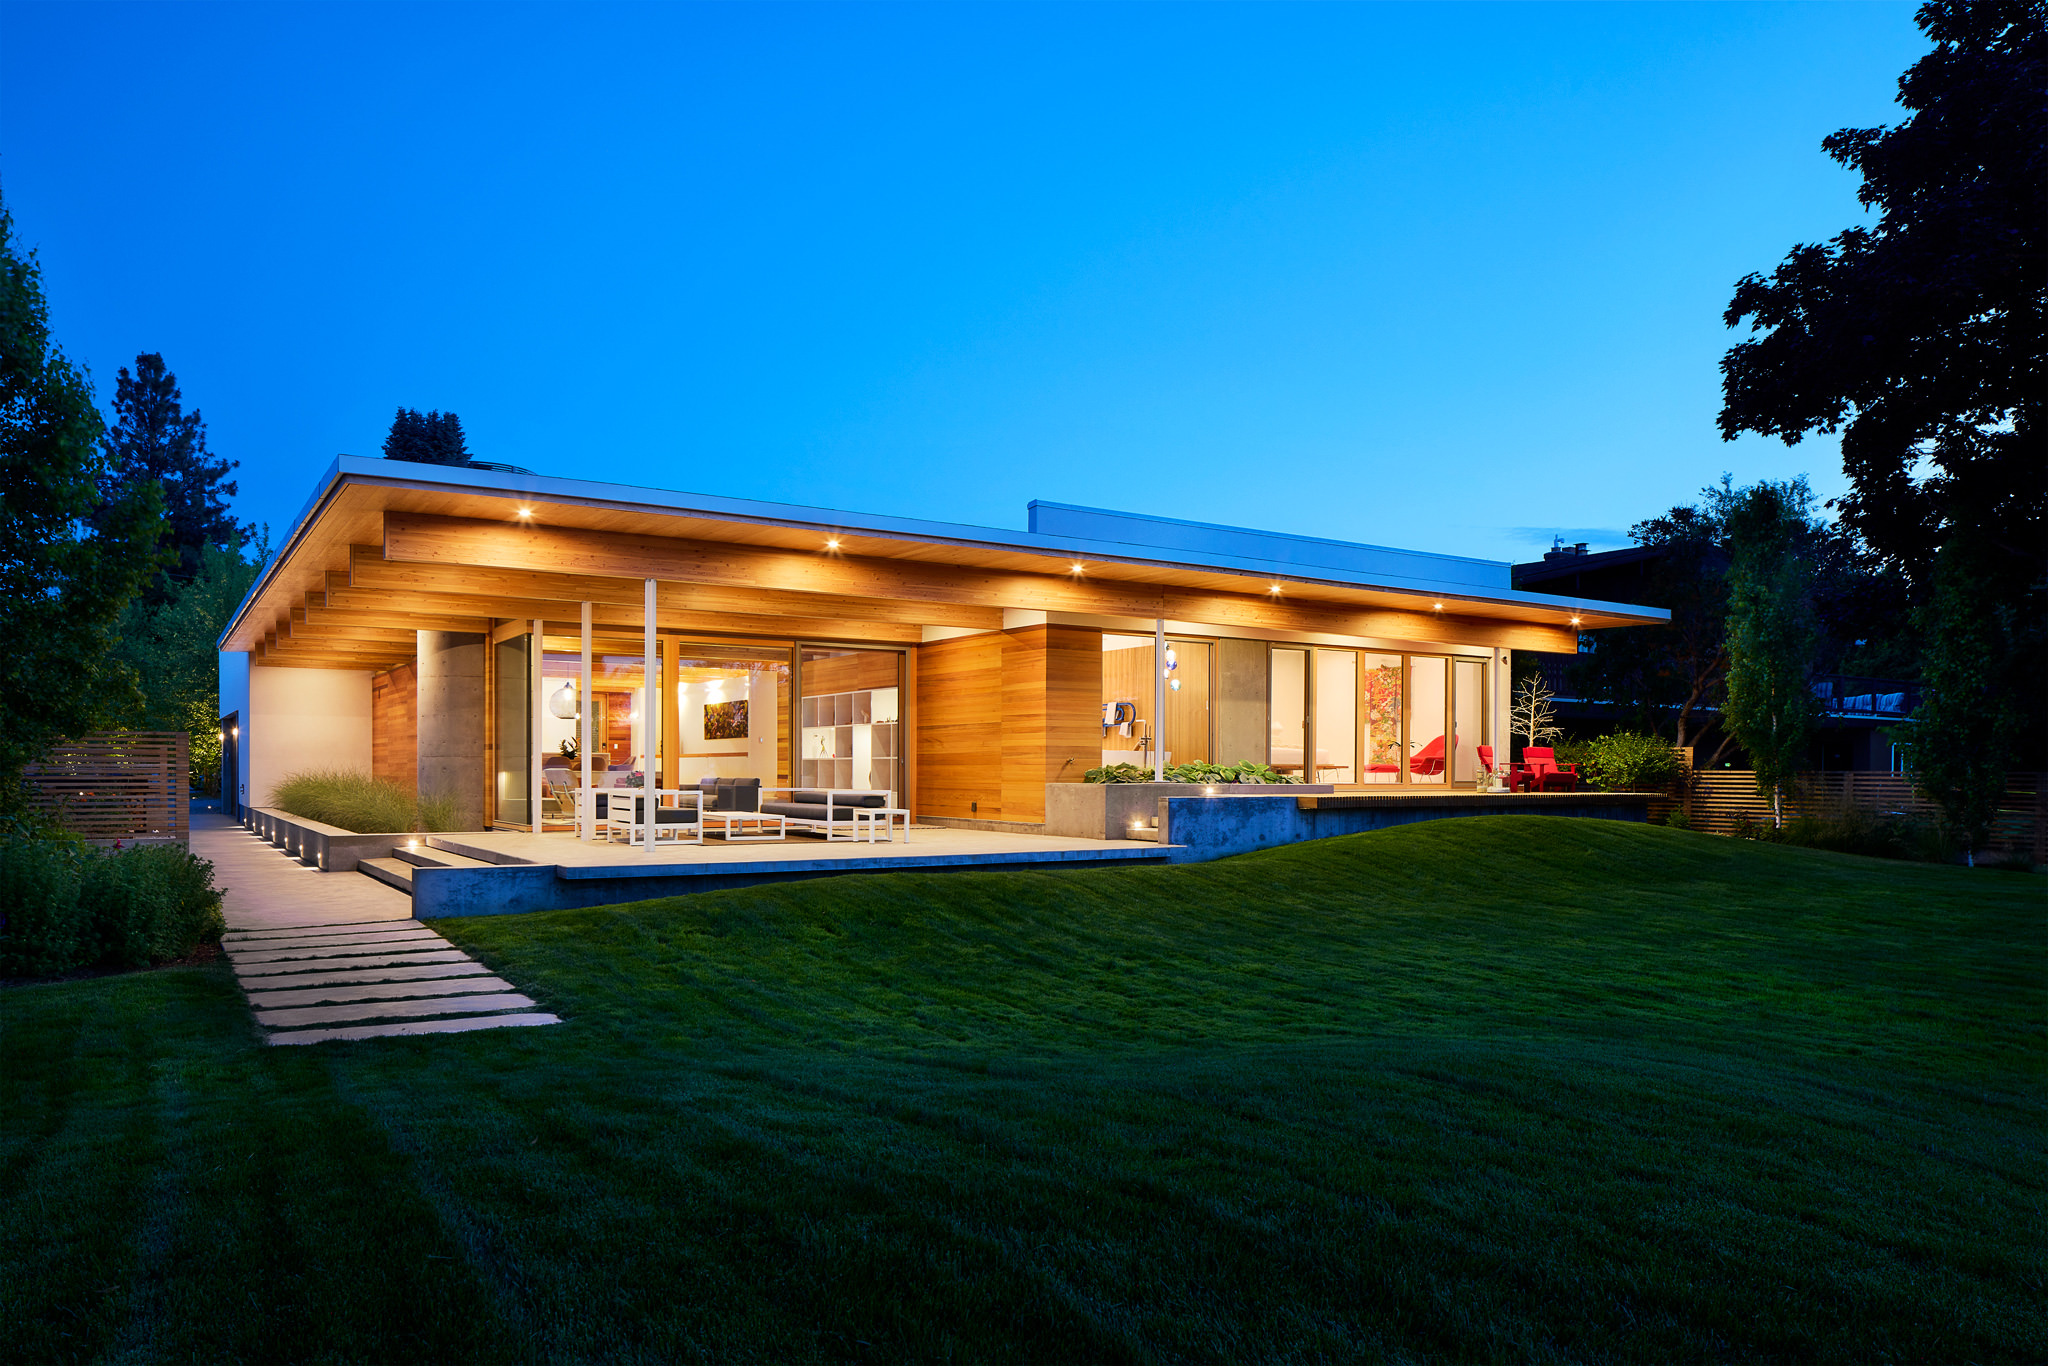 Dusk view of modern residence featuring wood finishes and lawn foreground